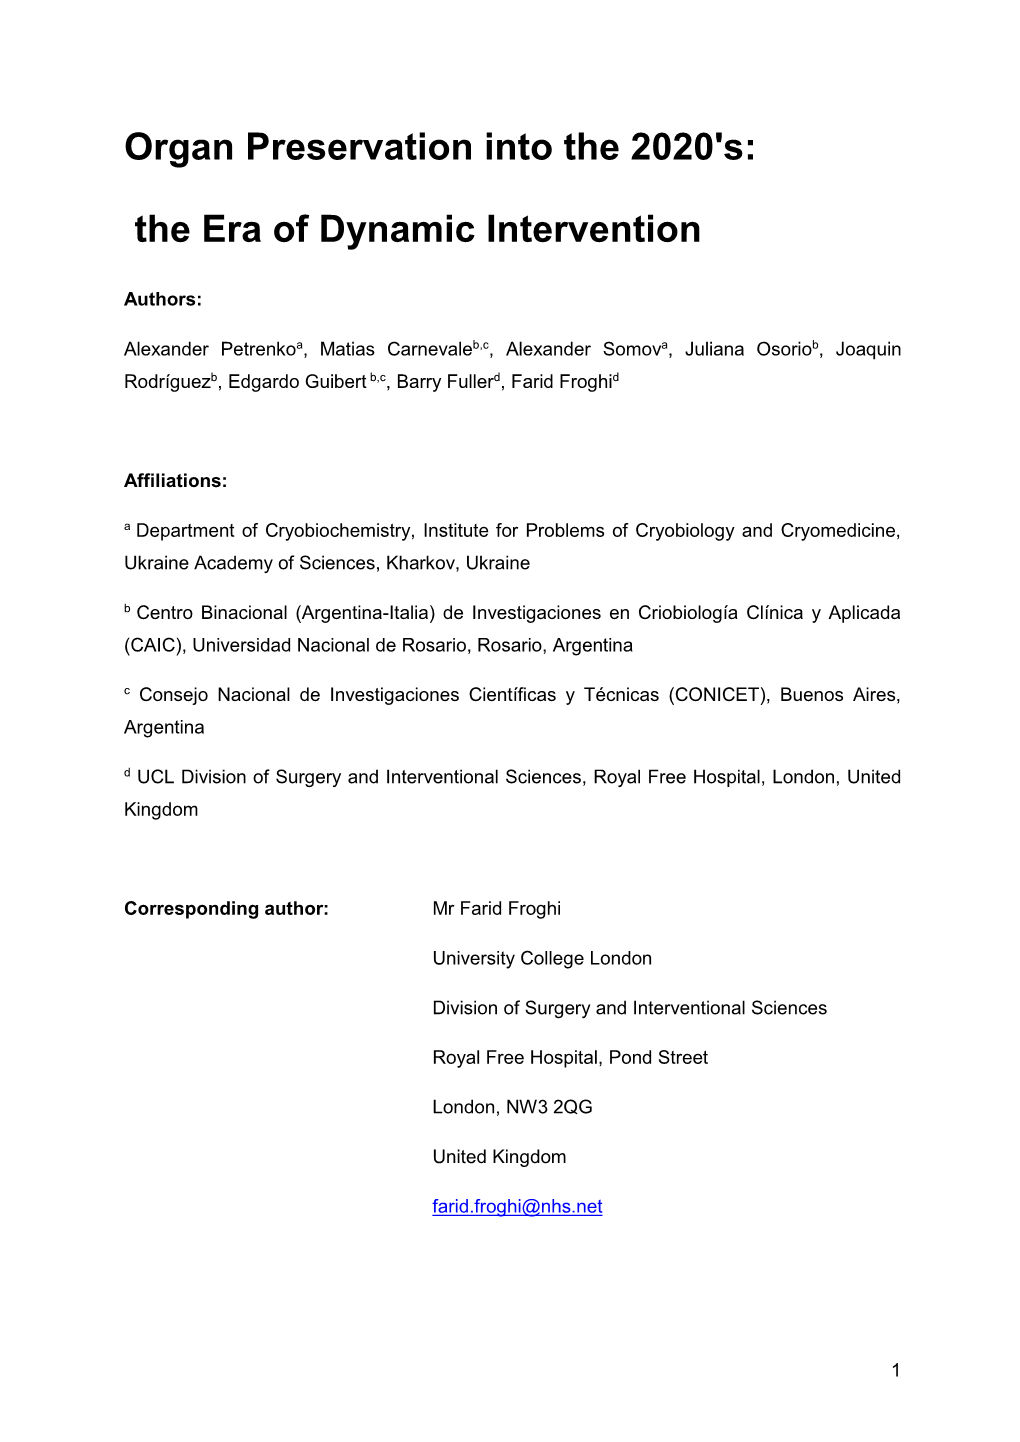 Organ Preservation Into the 2020'S: the Era of Dynamic Intervention